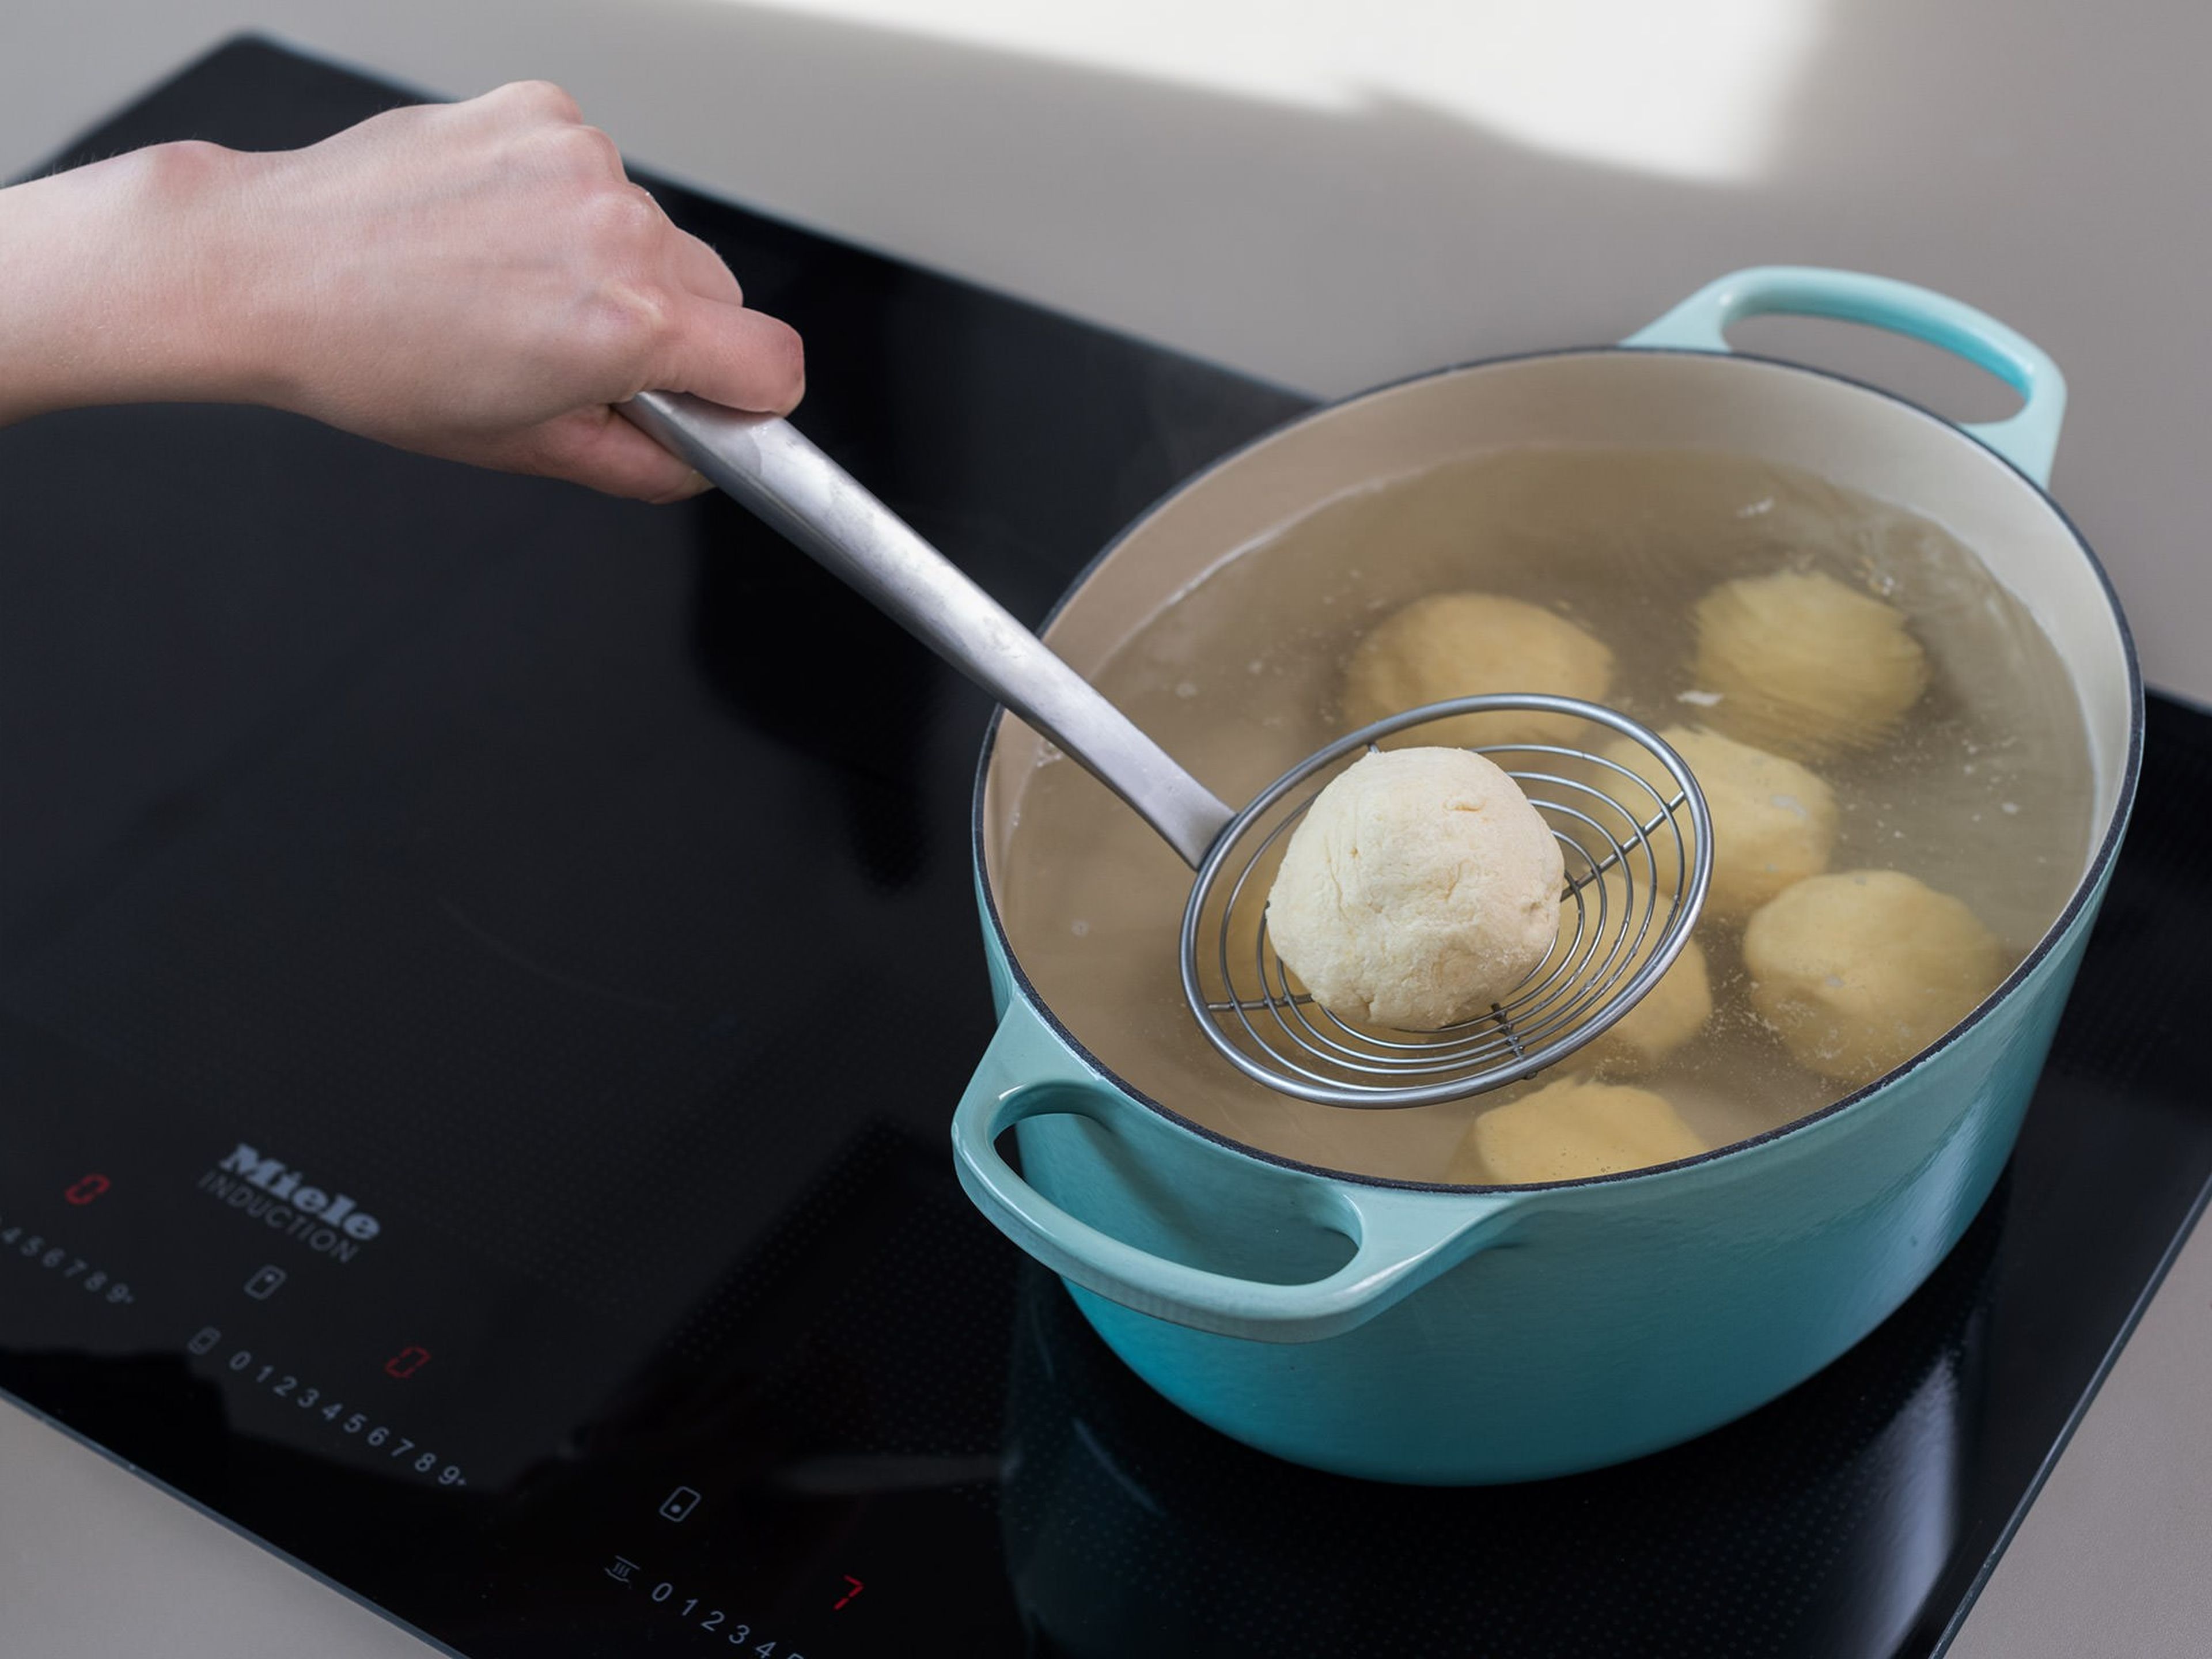 In a large saucepan, bring water to a boil. Cook the apricot dumplings for approx. 10 min. until they bob to the surface. Remove from the pot with a slotted spoon and allow to drain well.